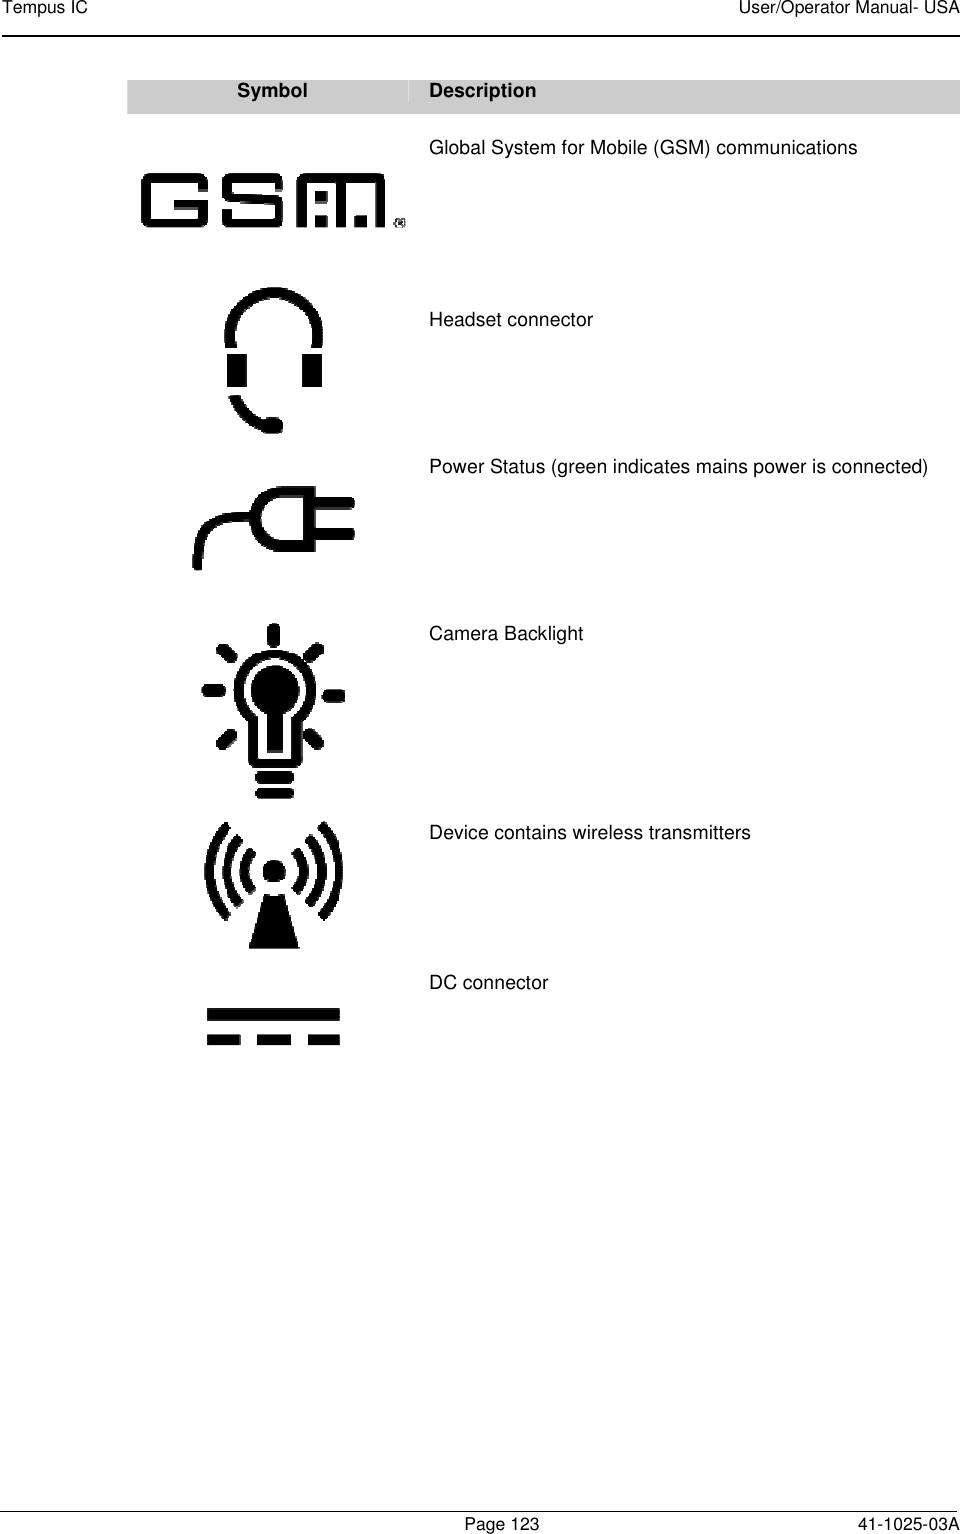 Tempus IC    User/Operator Manual- USA        Page 123   41-1025-03A Symbol Description     Global System for Mobile (GSM) communications      Headset connector     Power Status (green indicates mains power is connected)     Camera Backlight      Device contains wireless transmitters     DC connector              